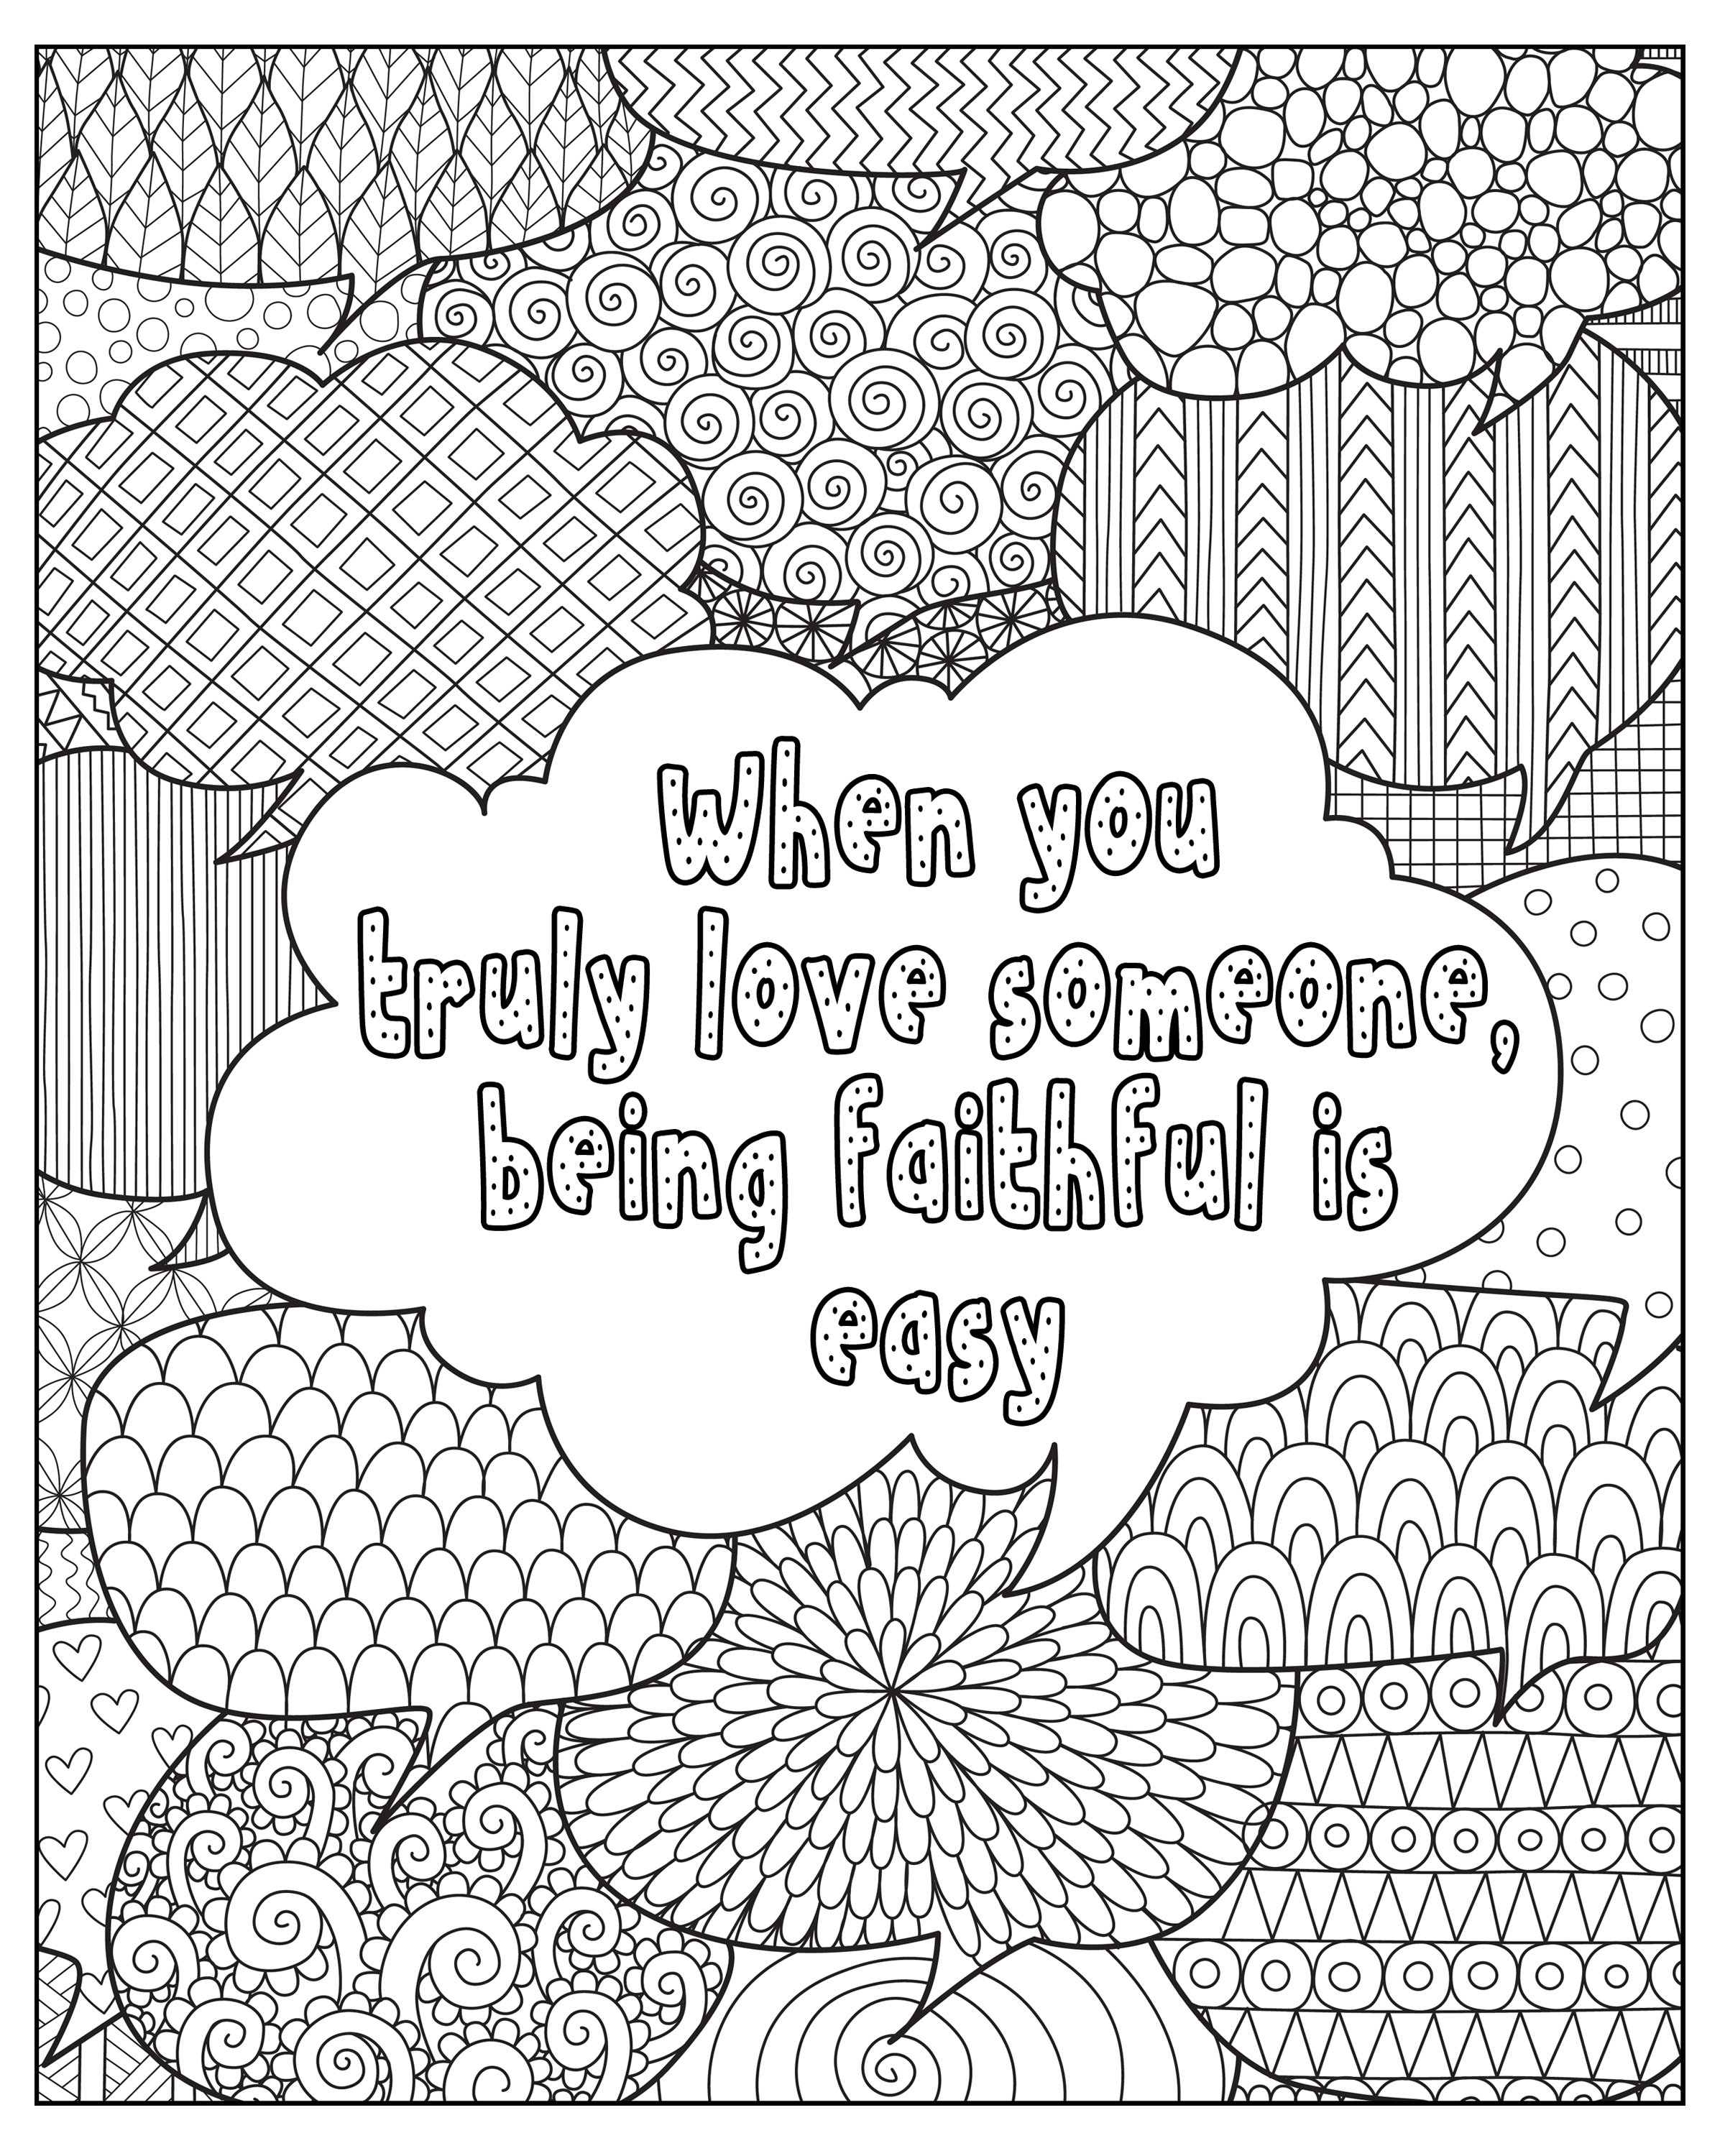 Inspirational Motivational Quotes Coloring Page Bundle for | Etsy Israel